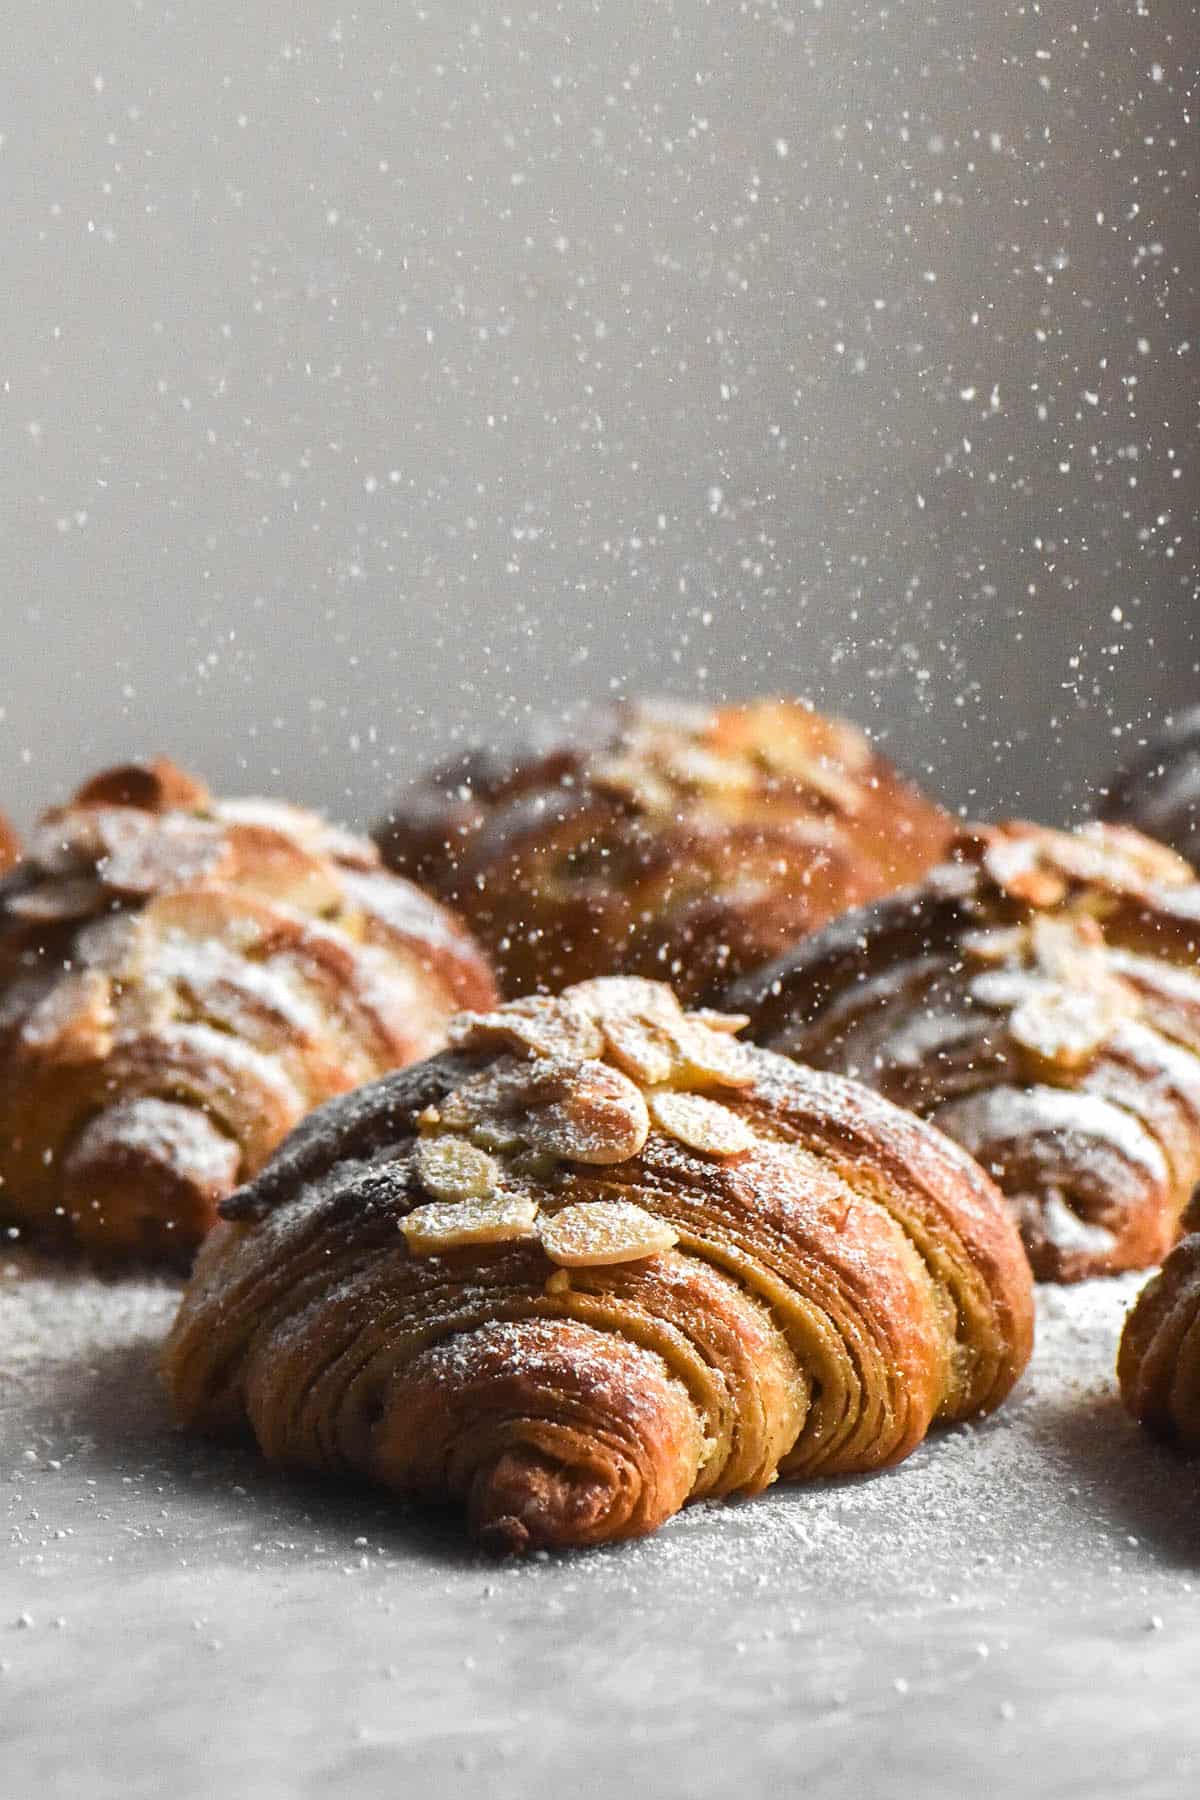 A side on view of a group df gluten free almond croissants being sprinkled with icing sugar. The croissants sit atop a white marble table against a white background, and the sprinkle of icing sugar drops down like flakes of snow. The croissants face the camera to reveal their flaky layers